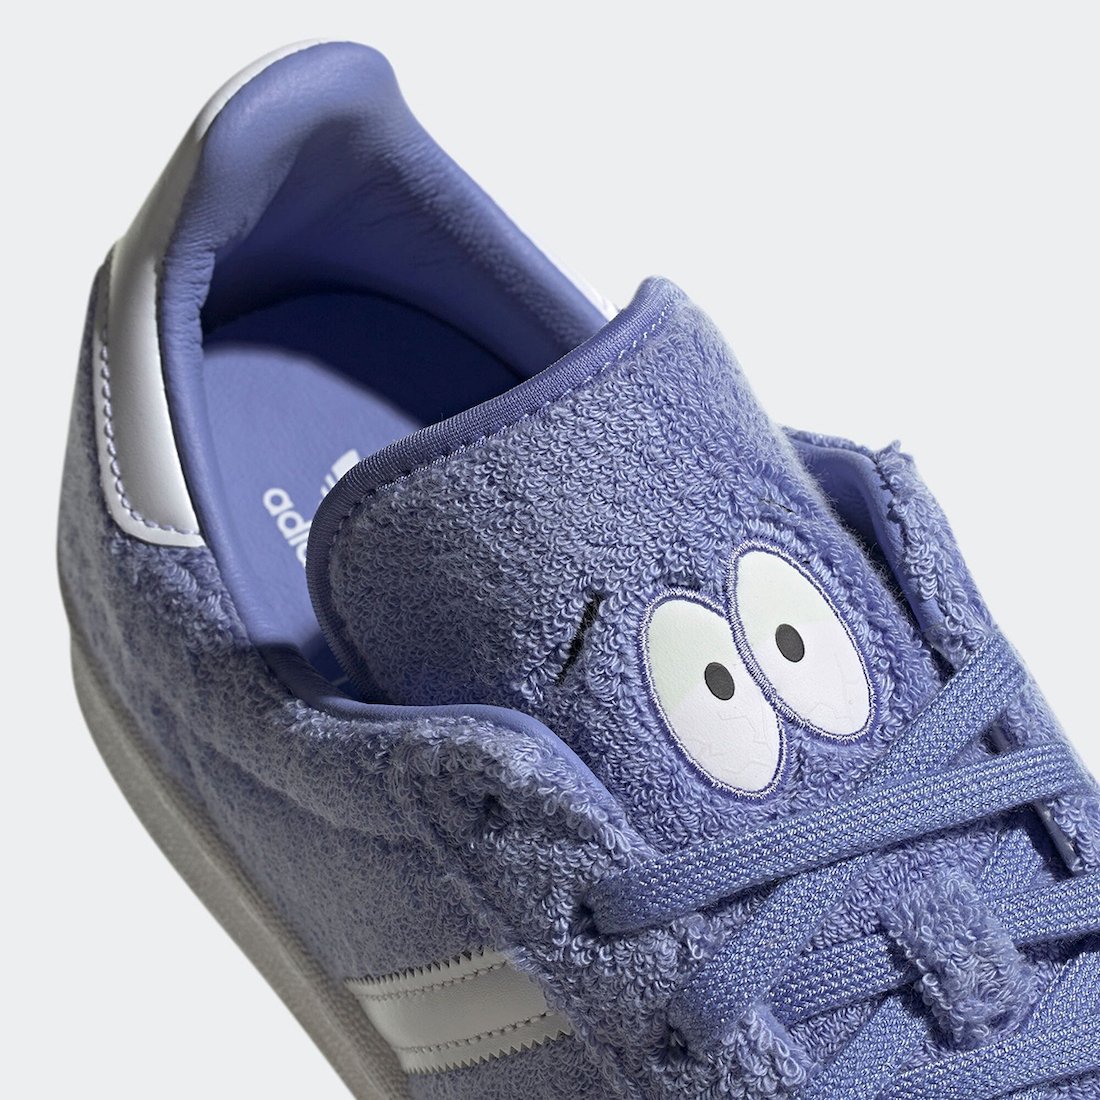 South Park adidas Campus 80s Towelie GZ9177 Release Date Info